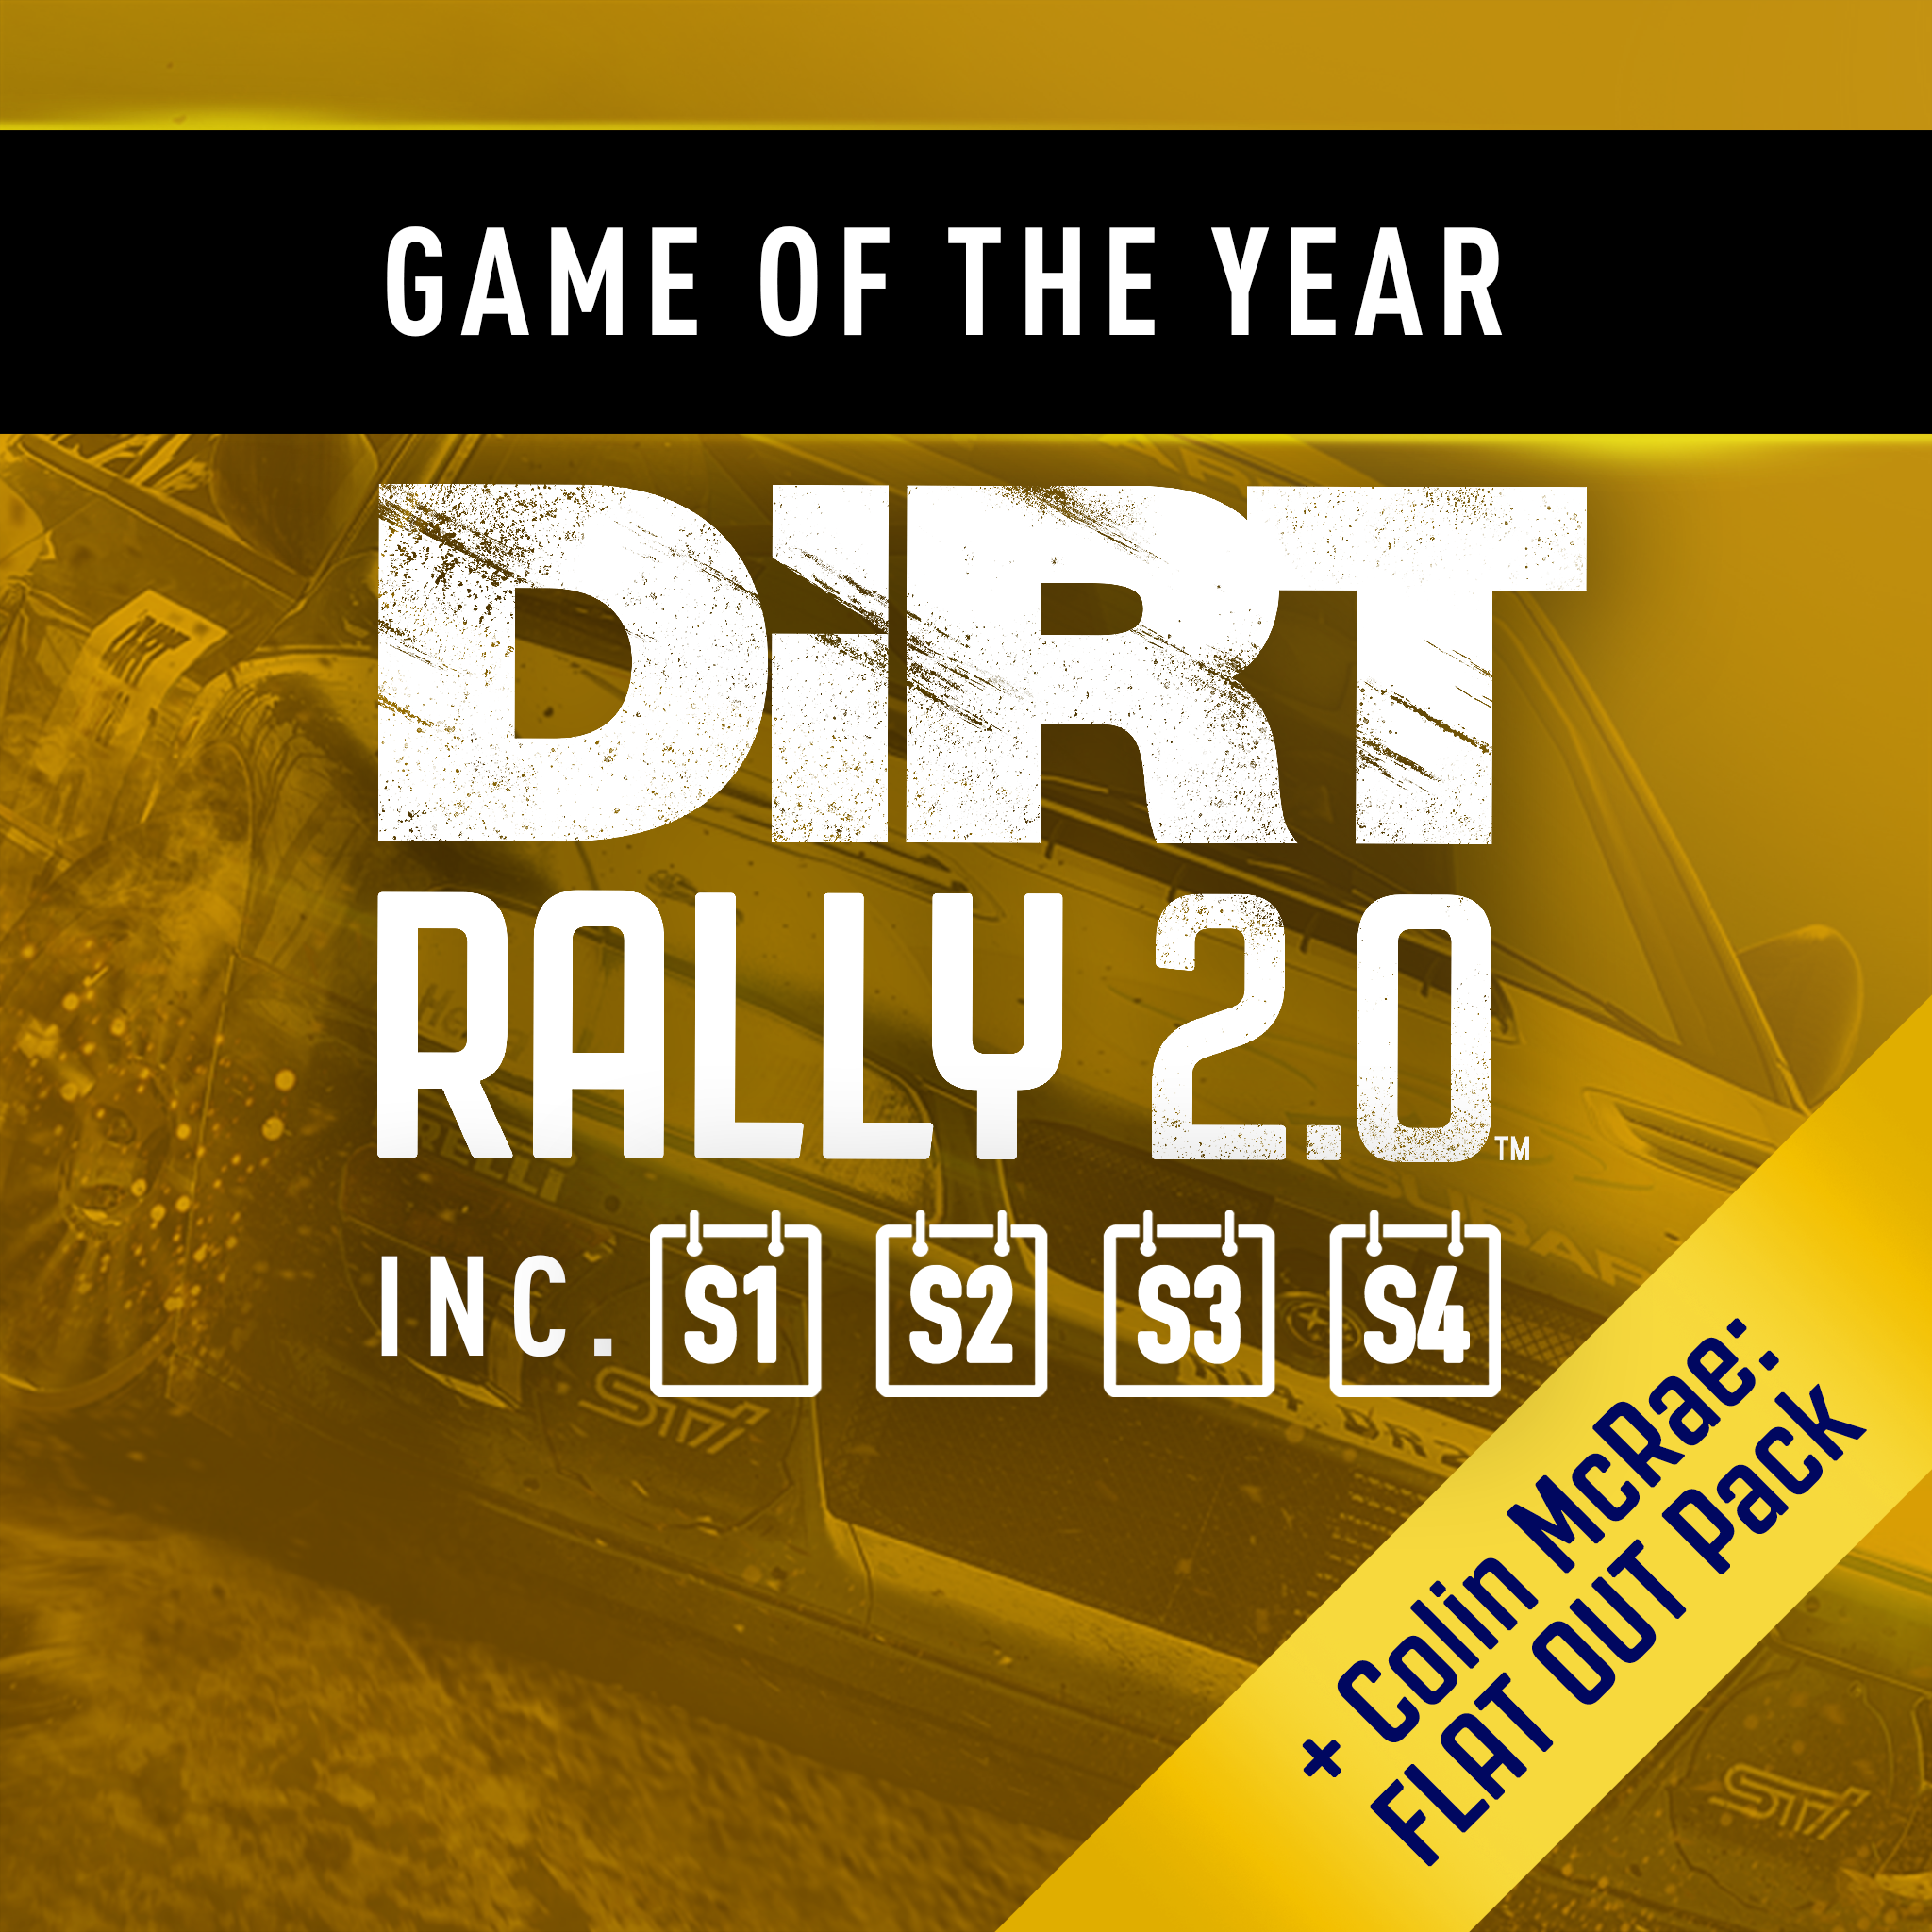 DiRT 2.0 - Game of the Year